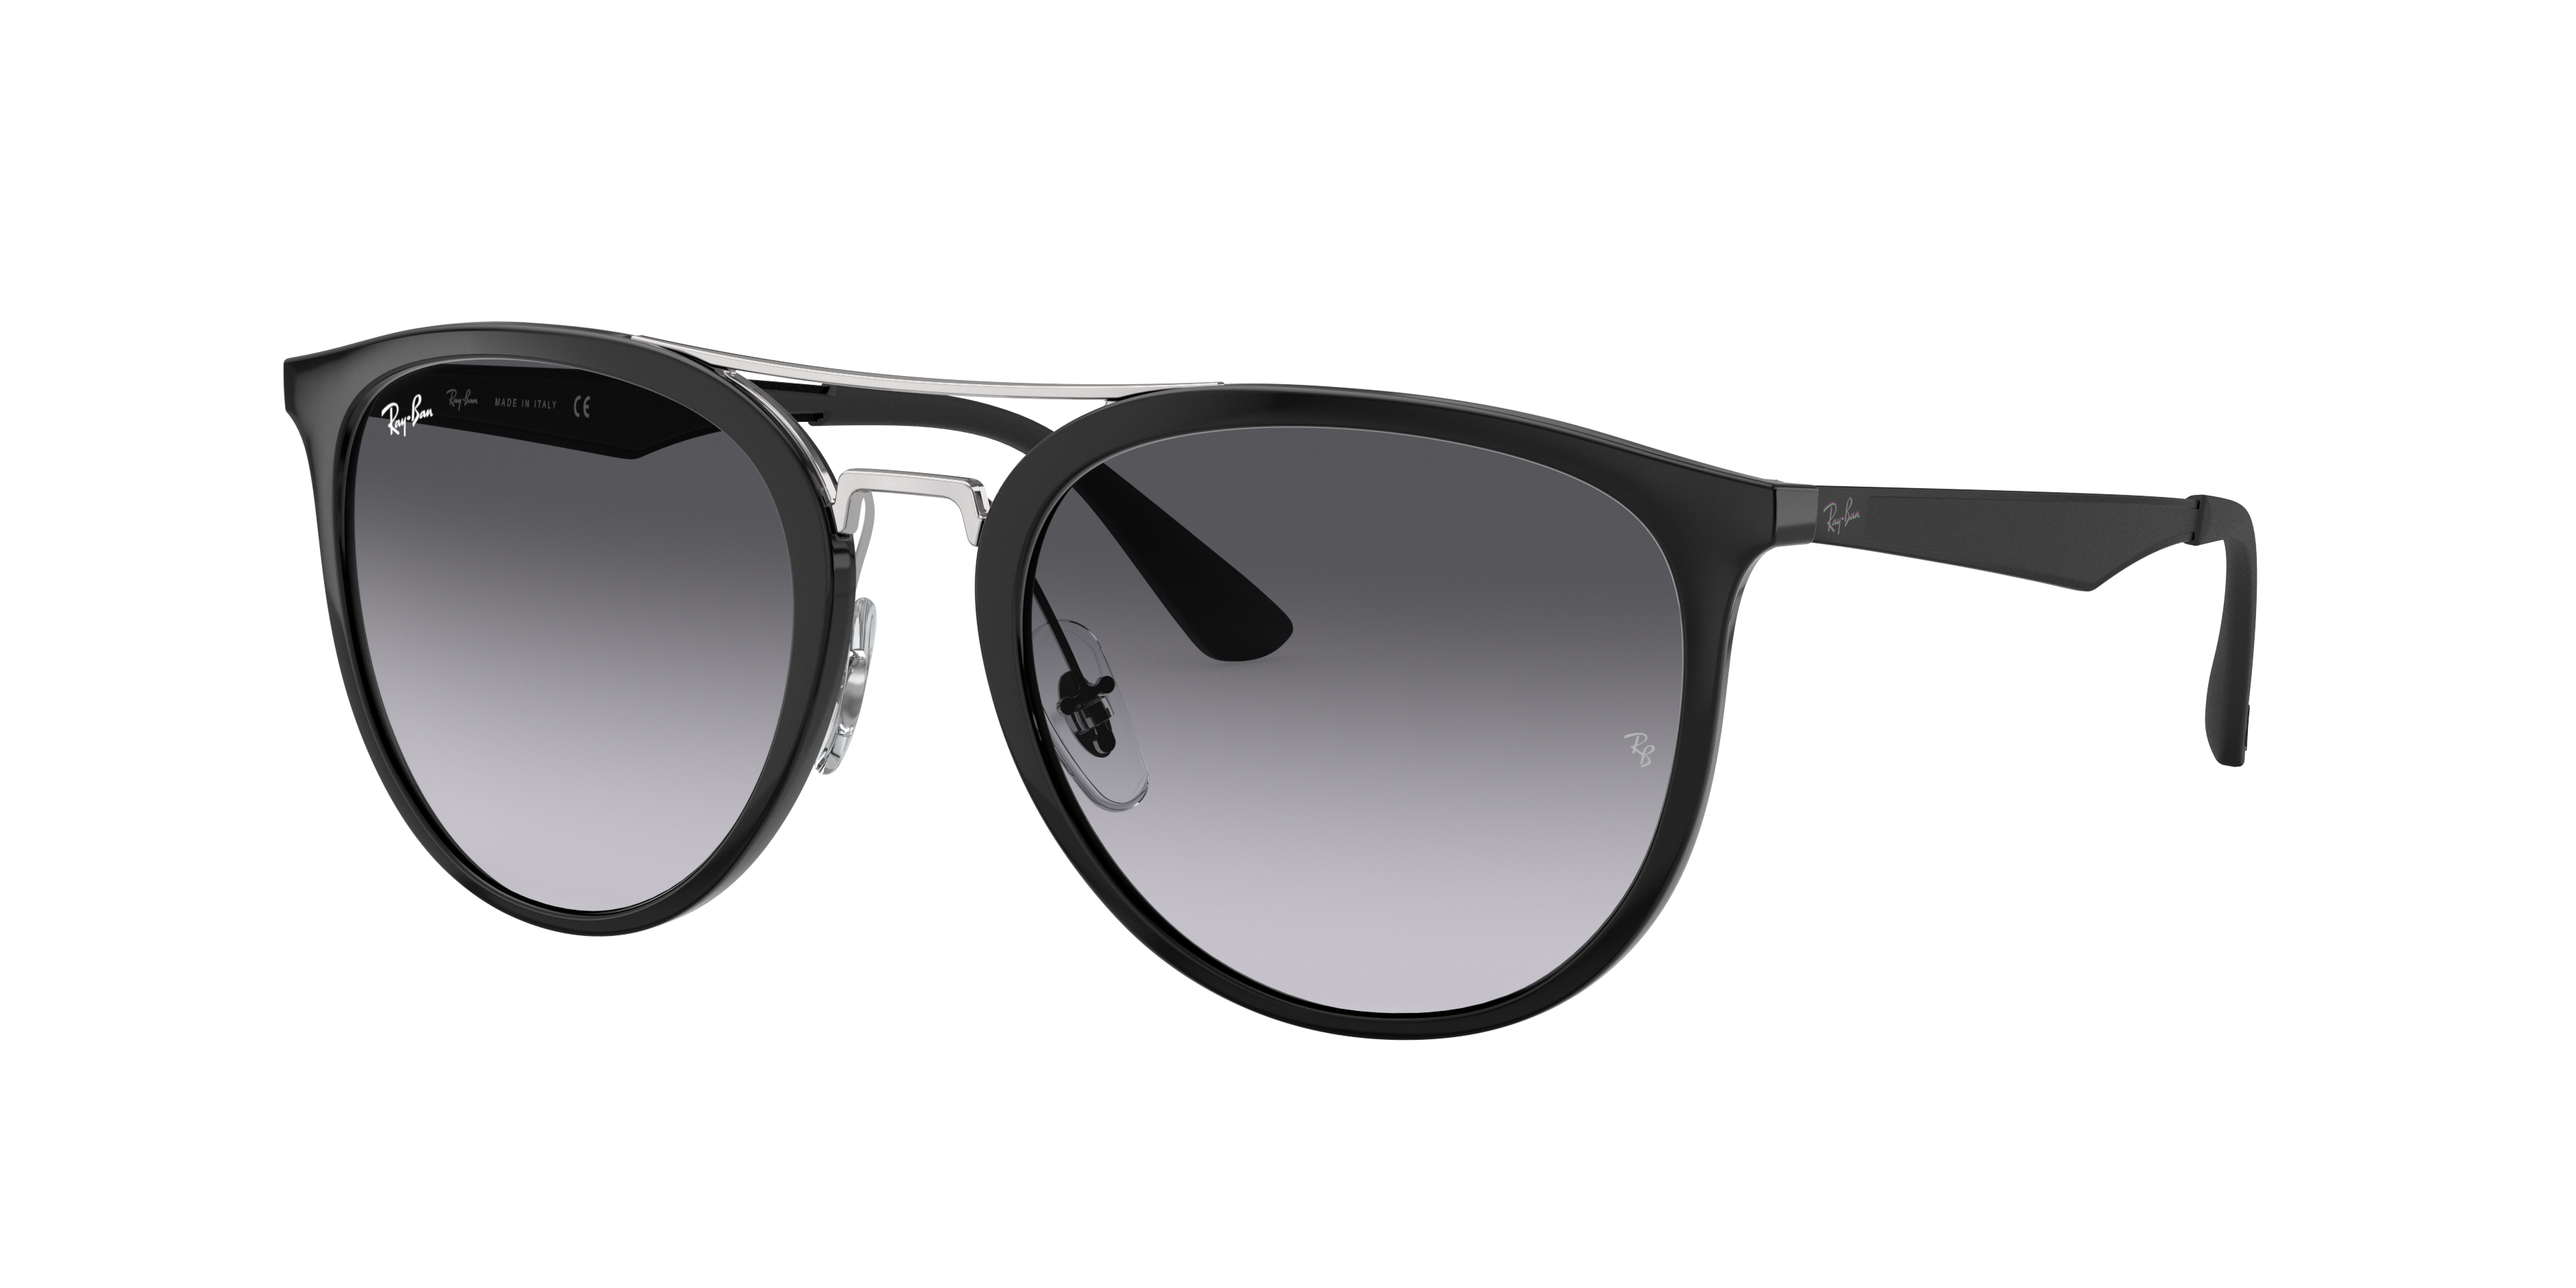 Ray-Ban RB4285 55 Sunglasses | LensCrafters